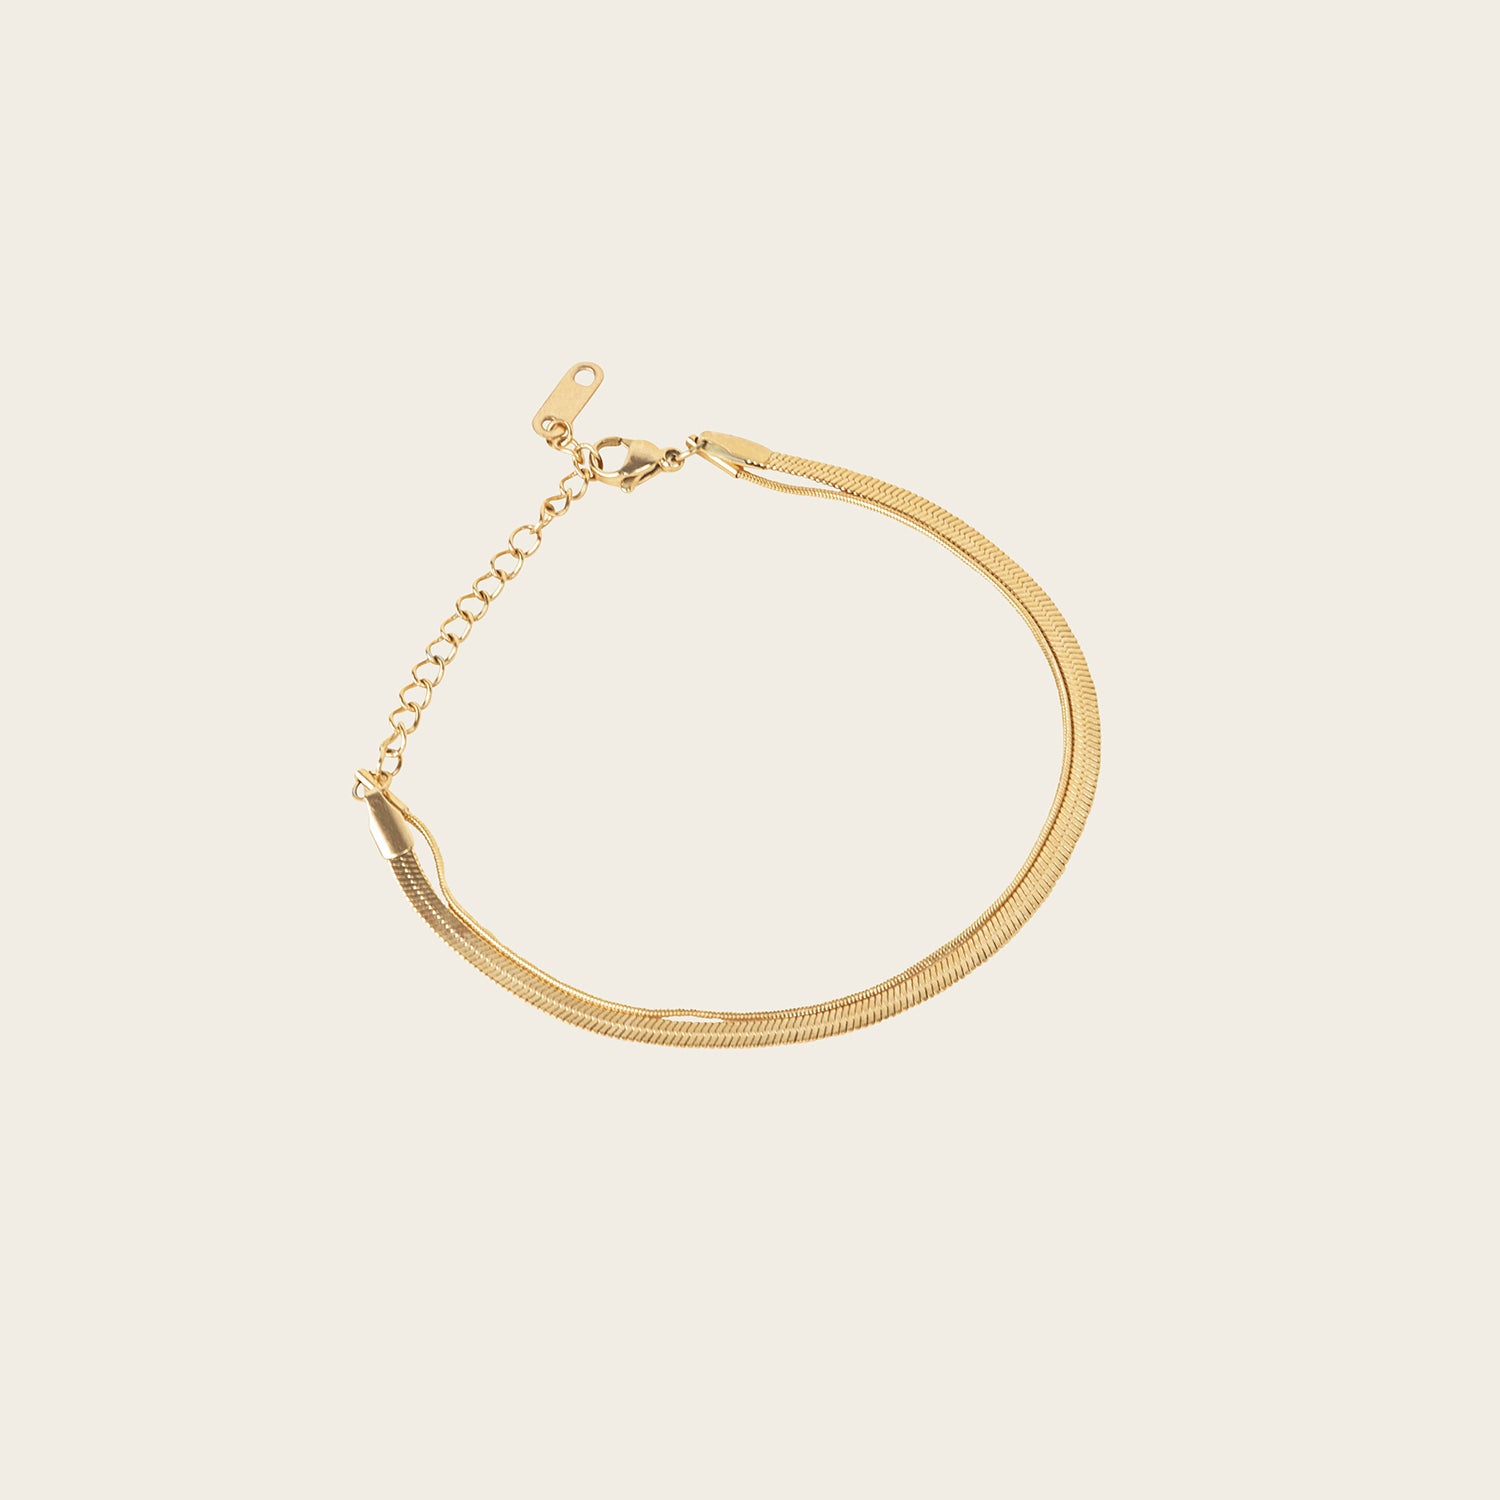 Image of the Double Layered Bracelet is crafted from 14K gold plated stainless steel for outstanding durability and a non-tarnish, water-resistant, allergy-free and antioxidant finish. Plus, its adjustable design ensures a perfect fit for any wrist.